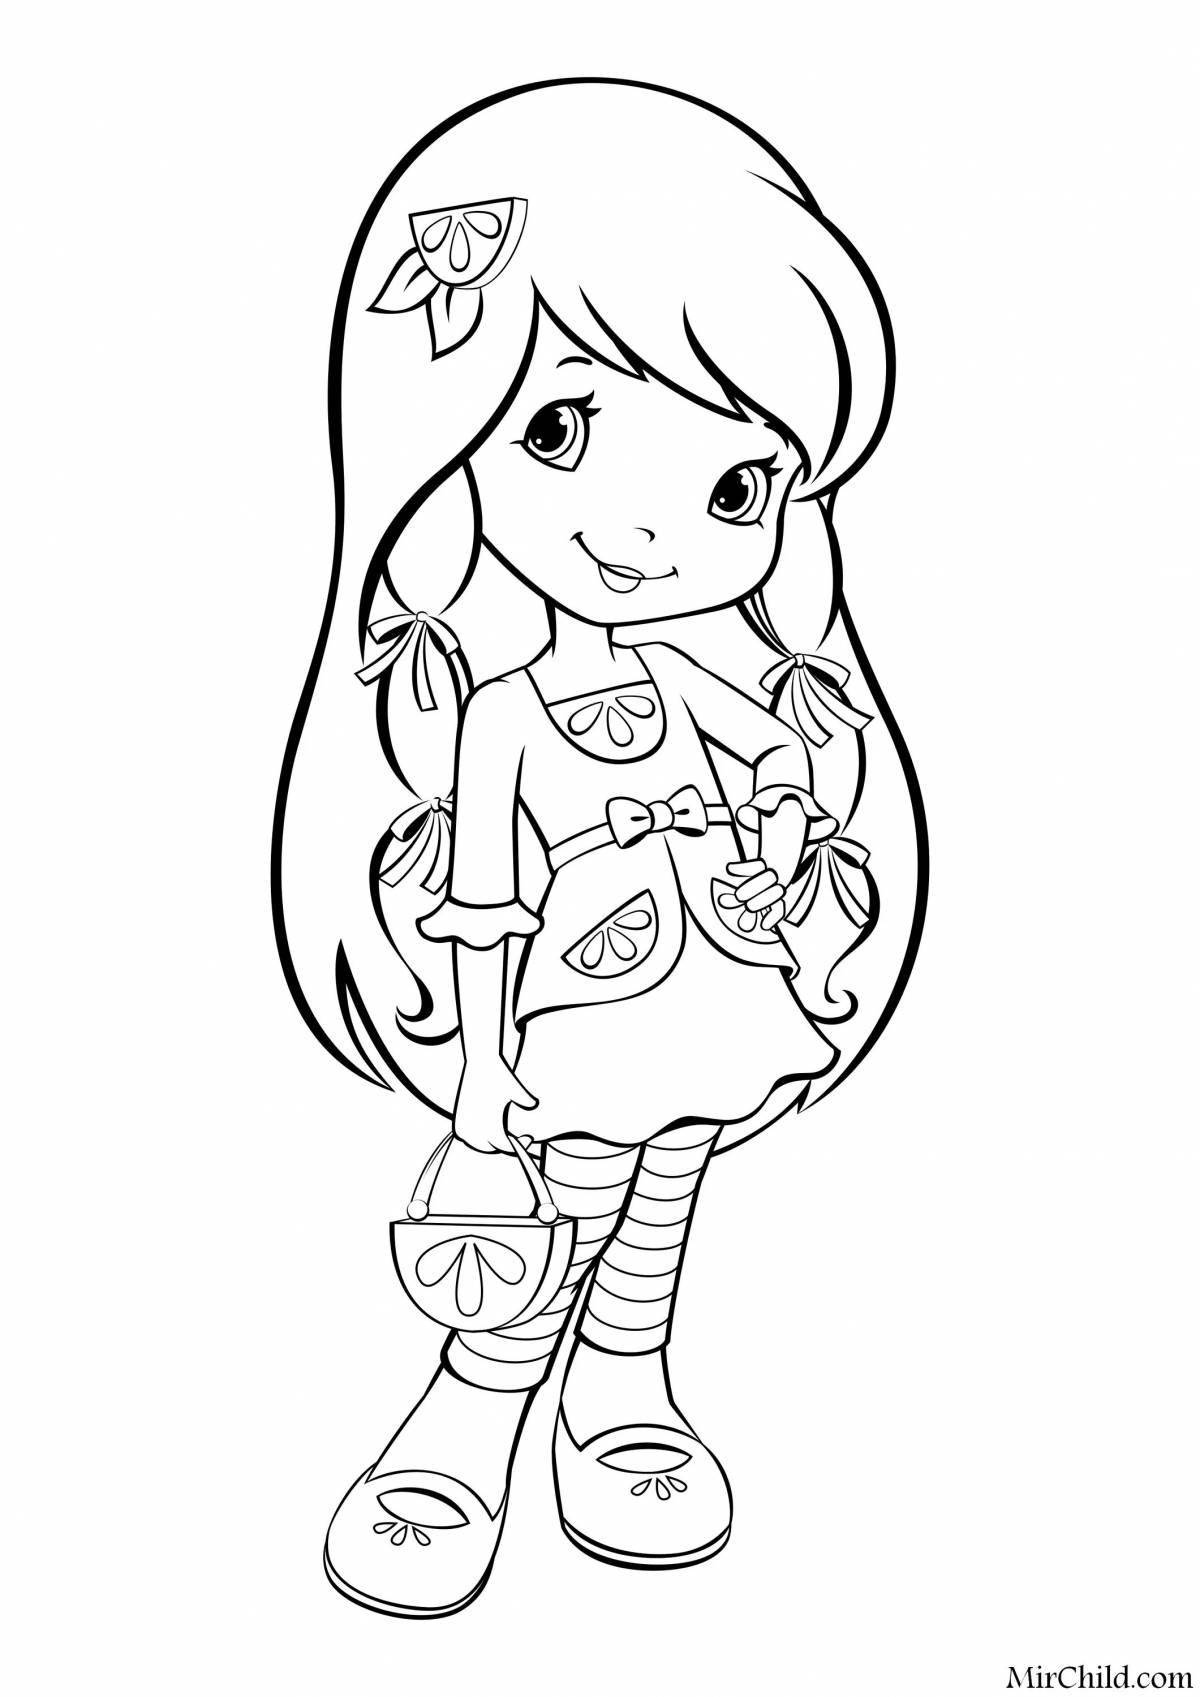 Wonderful charlotte strawberry coloring pages for girls